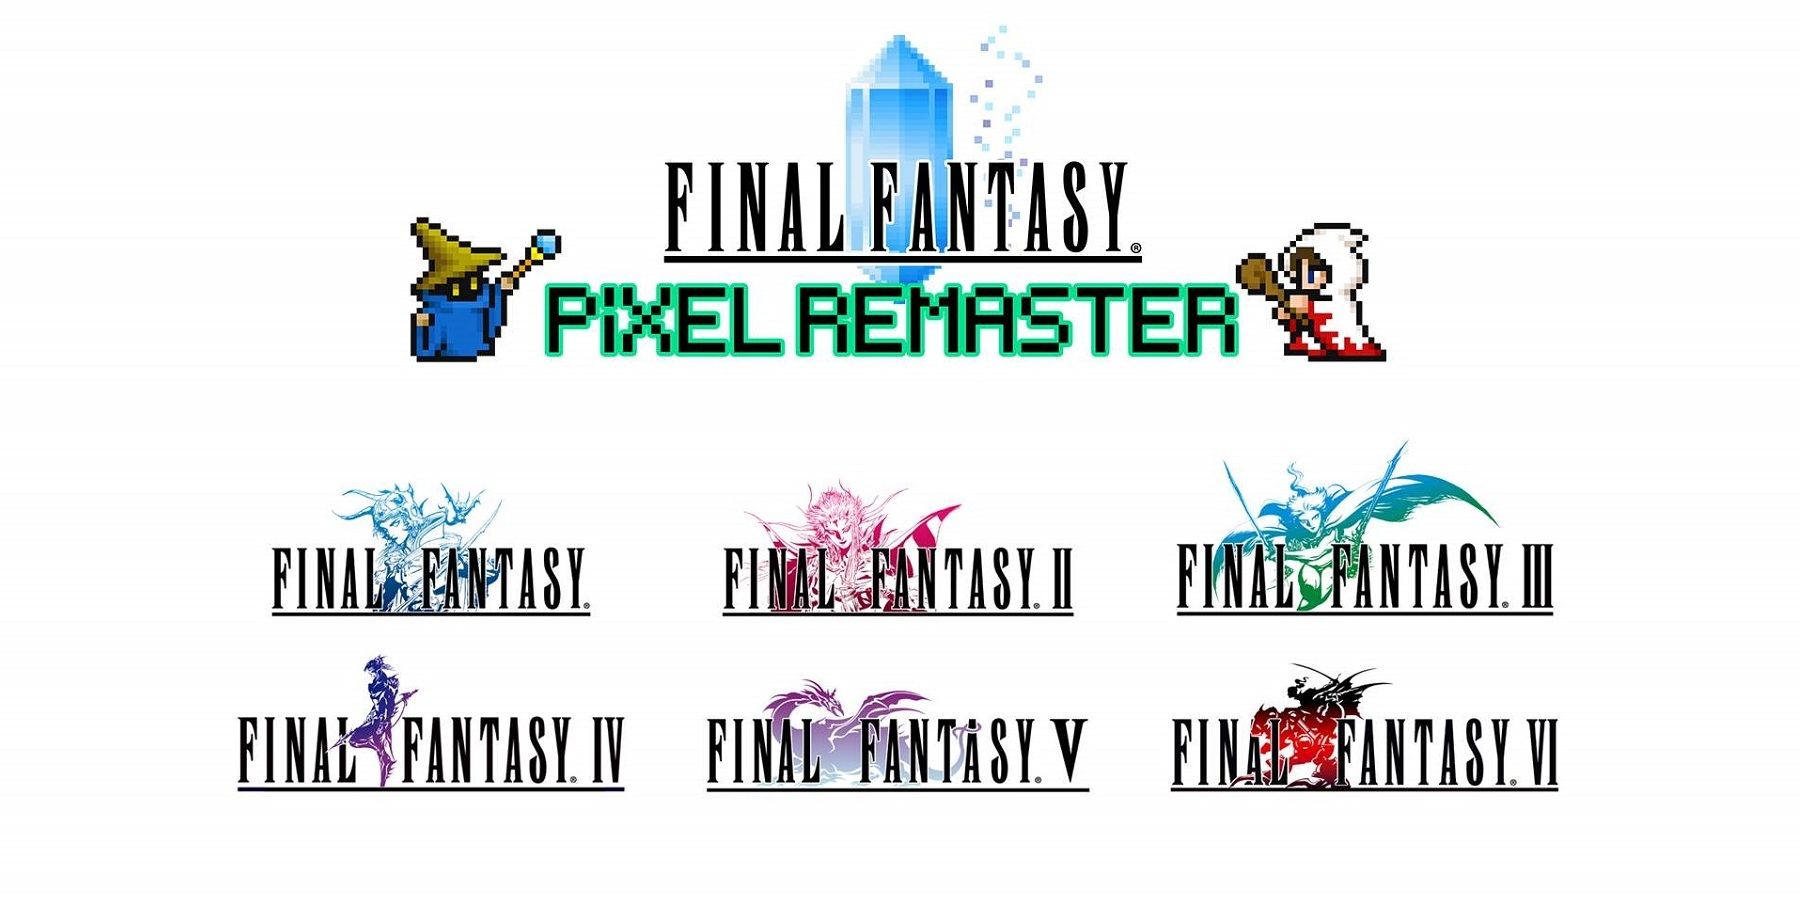 Final Fantasy Pixel Remasters Are Sold Out and Going for Ridiculous Prices Online